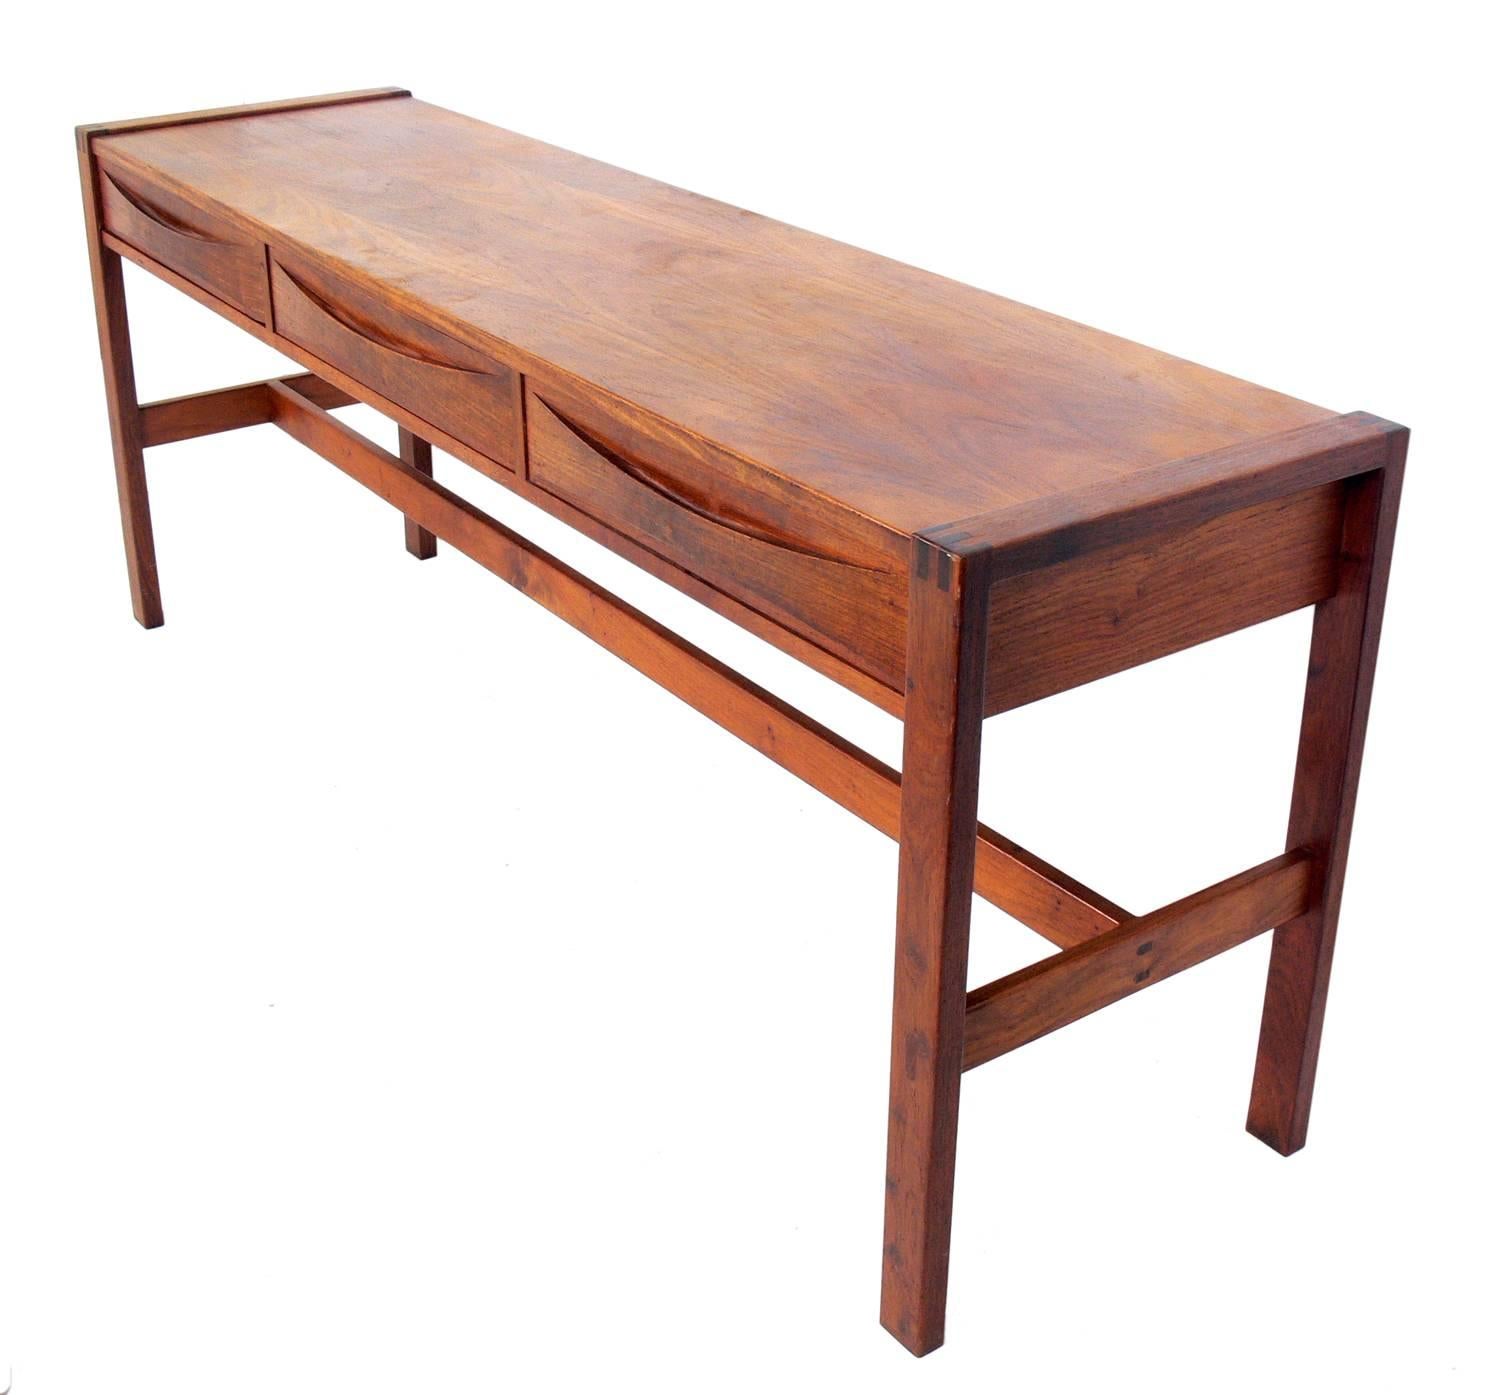 Clean lined midcentury console table, designed by John Tabraham for Kallenbach, South African, circa 1960s. Clearly inspired by Danish modern design, but with clean lines and little ornamentation, save the elegant joinery. See detail photos. This